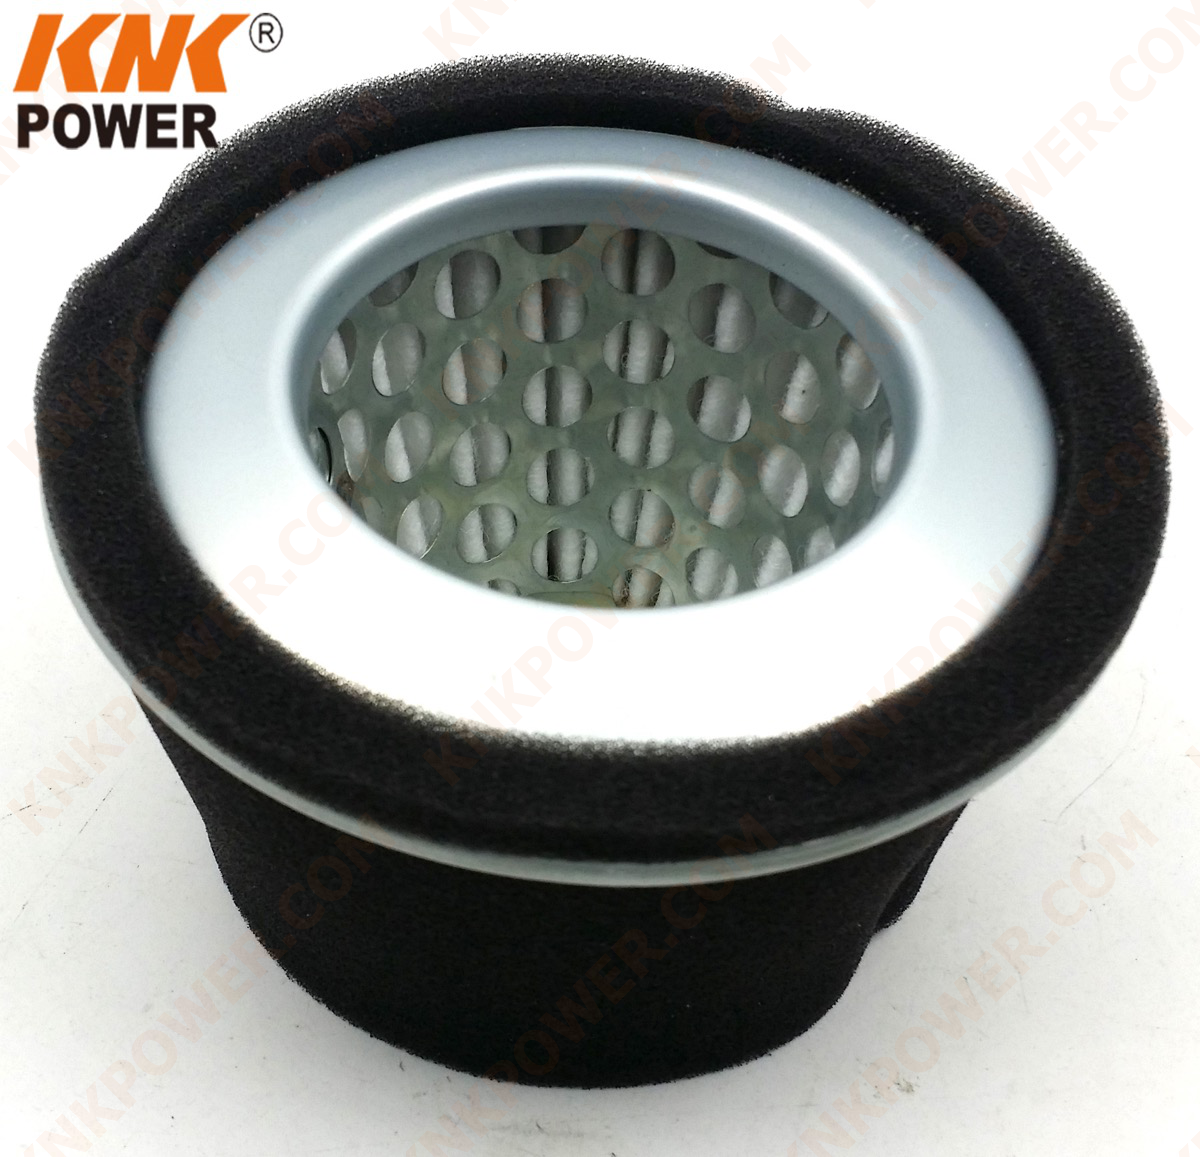 knkpower product image 19138 